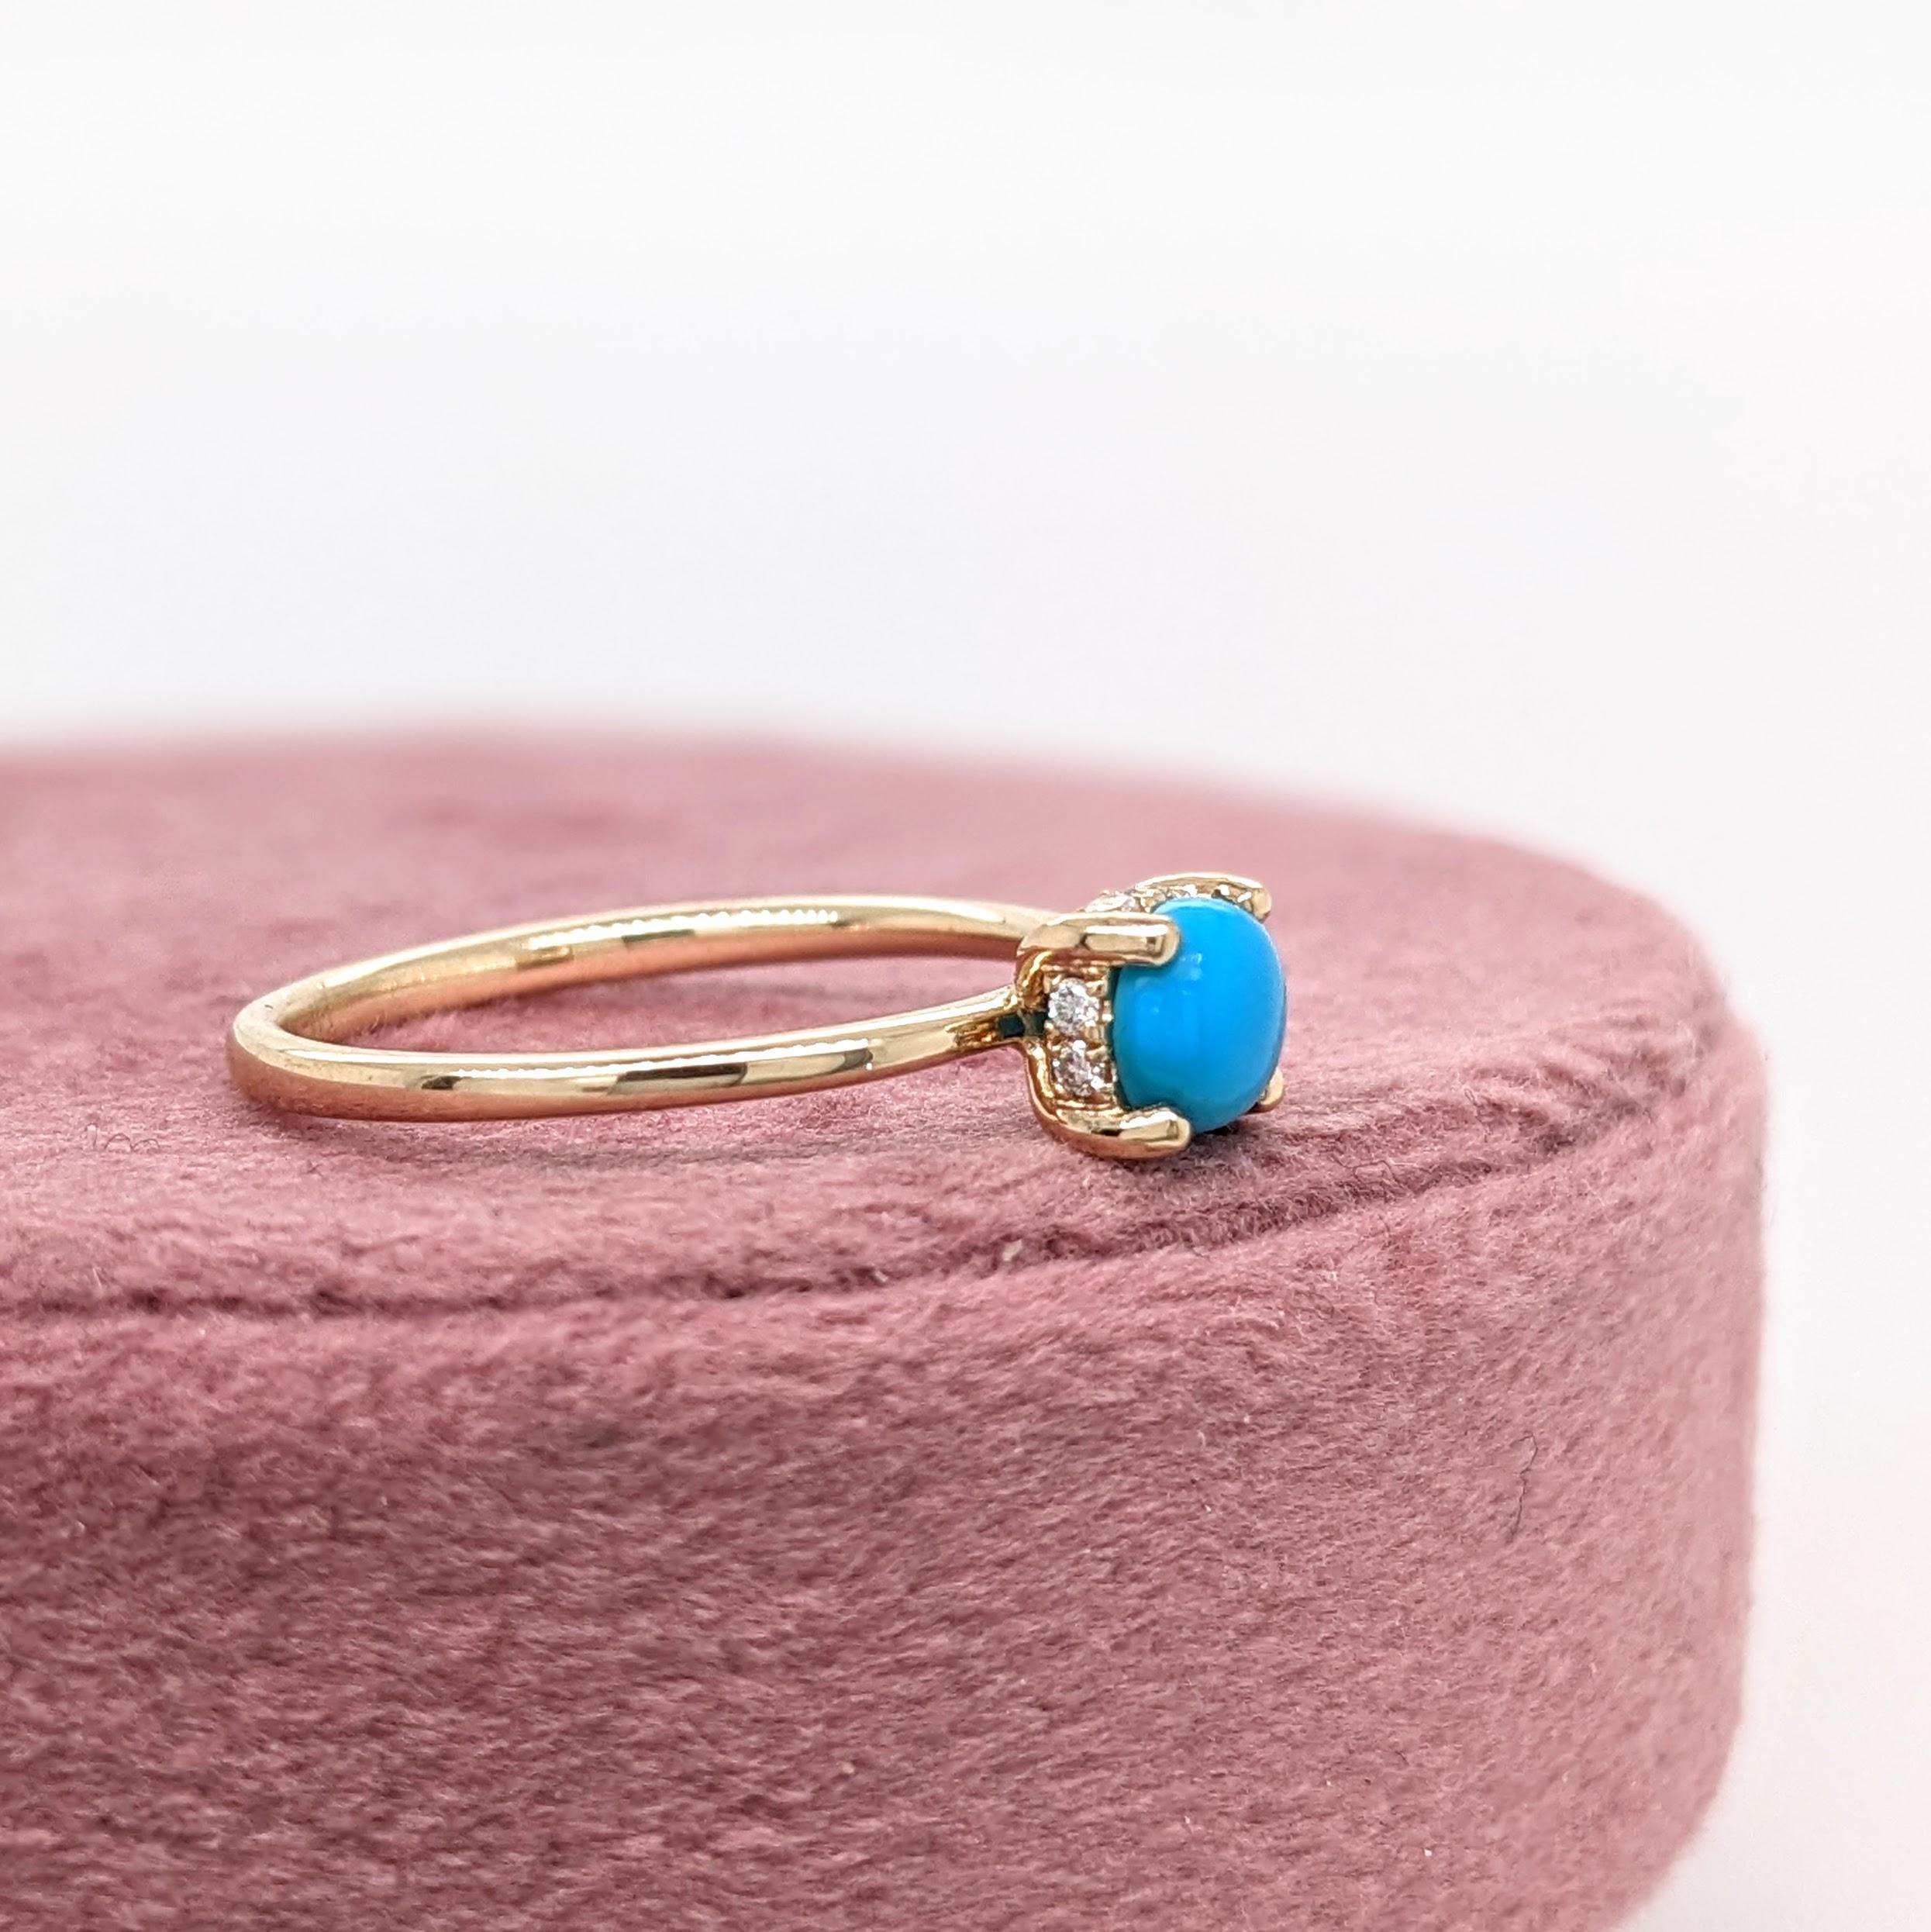 Turquoise Ring w Earth Mined Diamonds in Solid 14K Yellow Gold Round 5mm 2